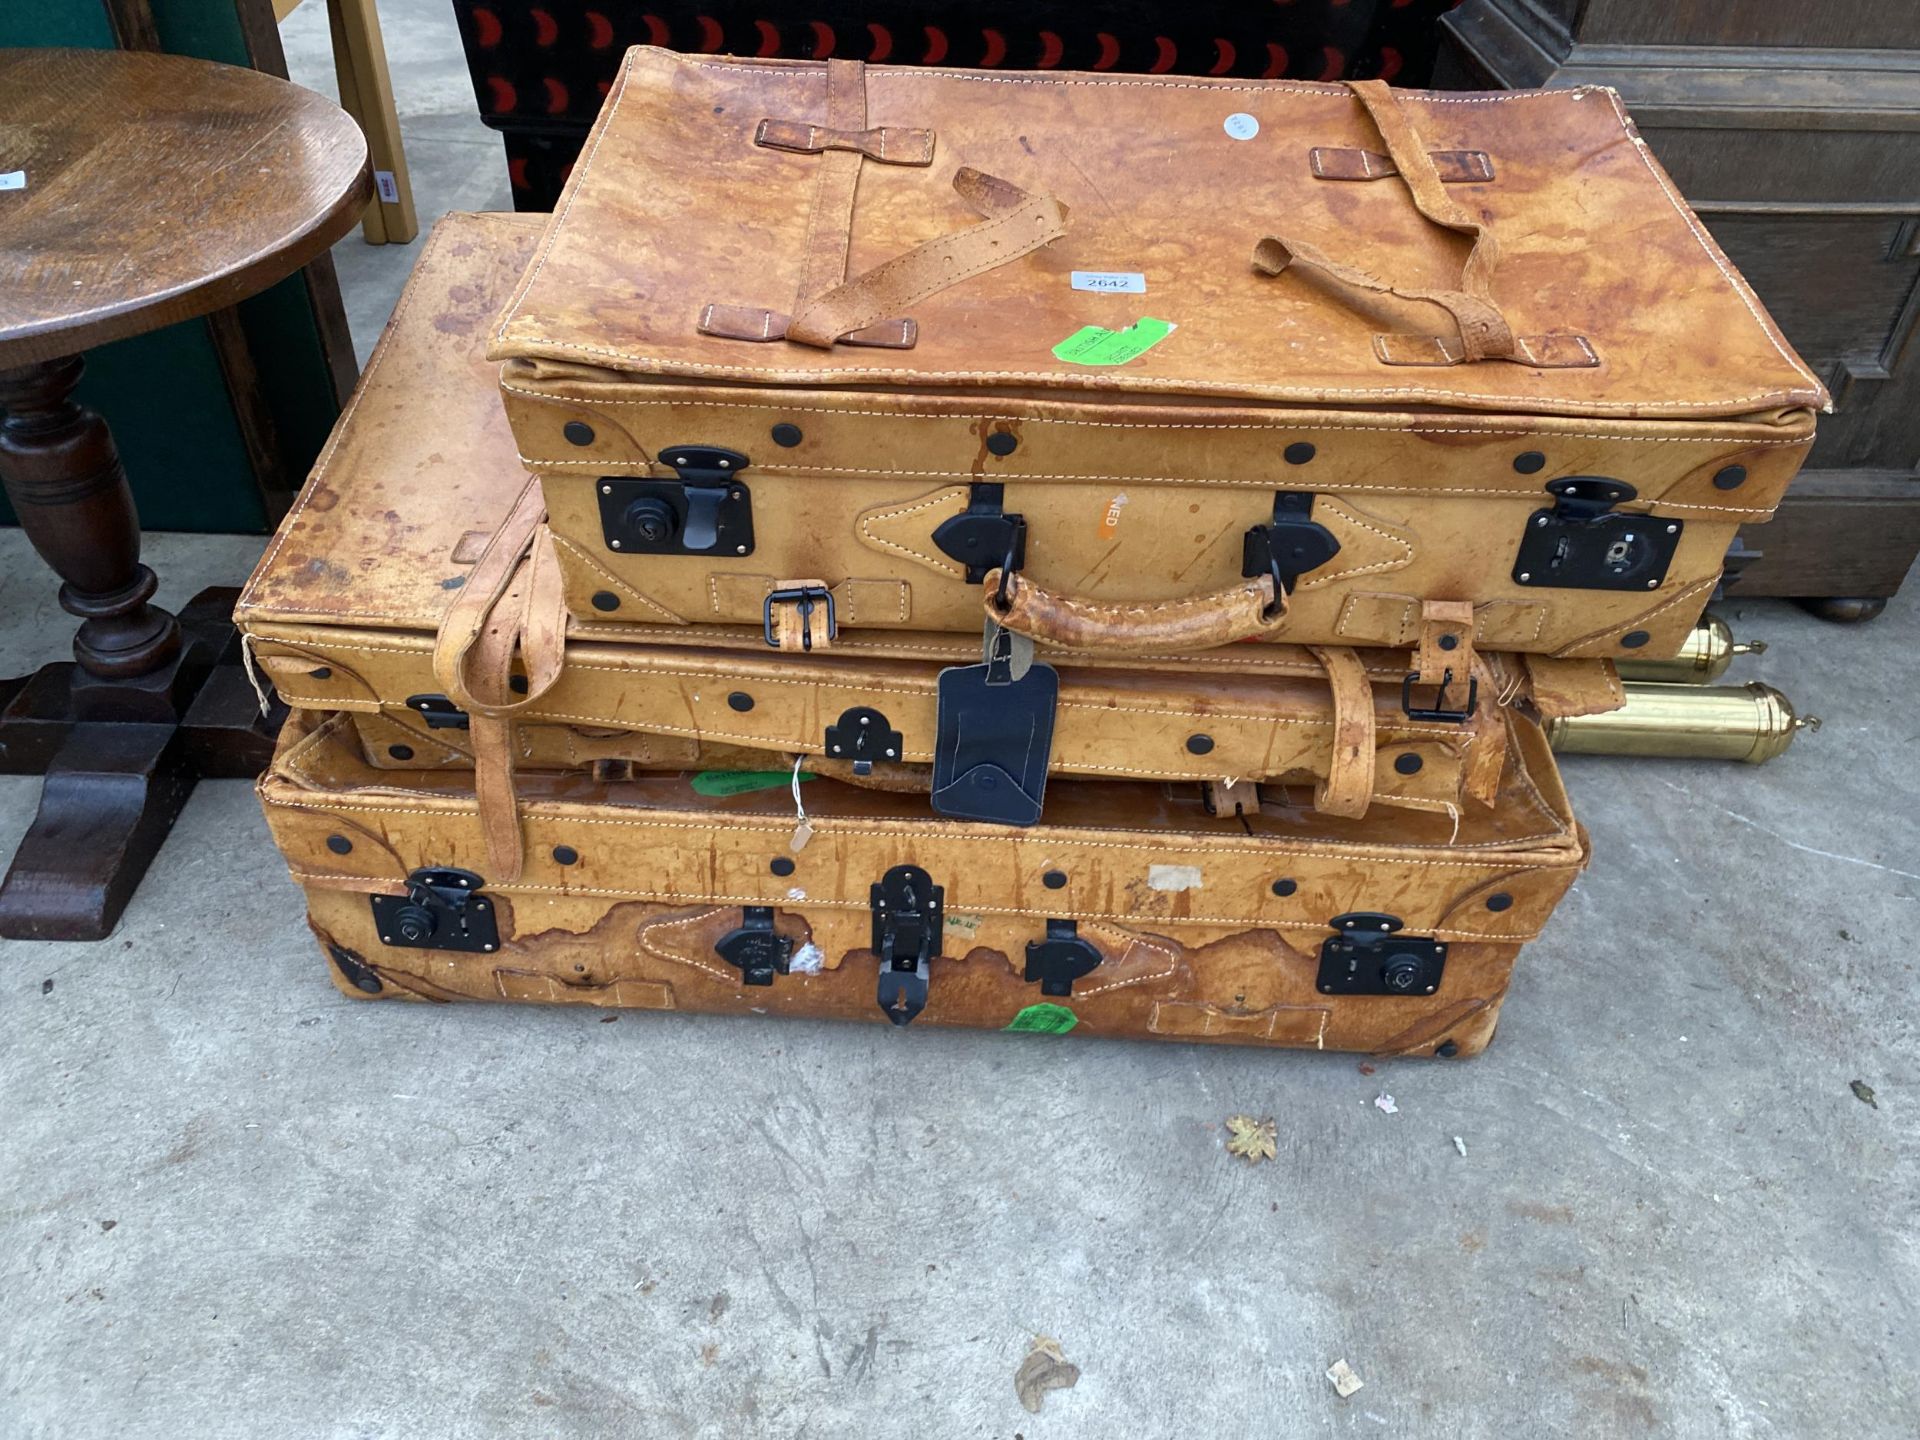 THREE GIOVANNI LEATHER SUITCASES